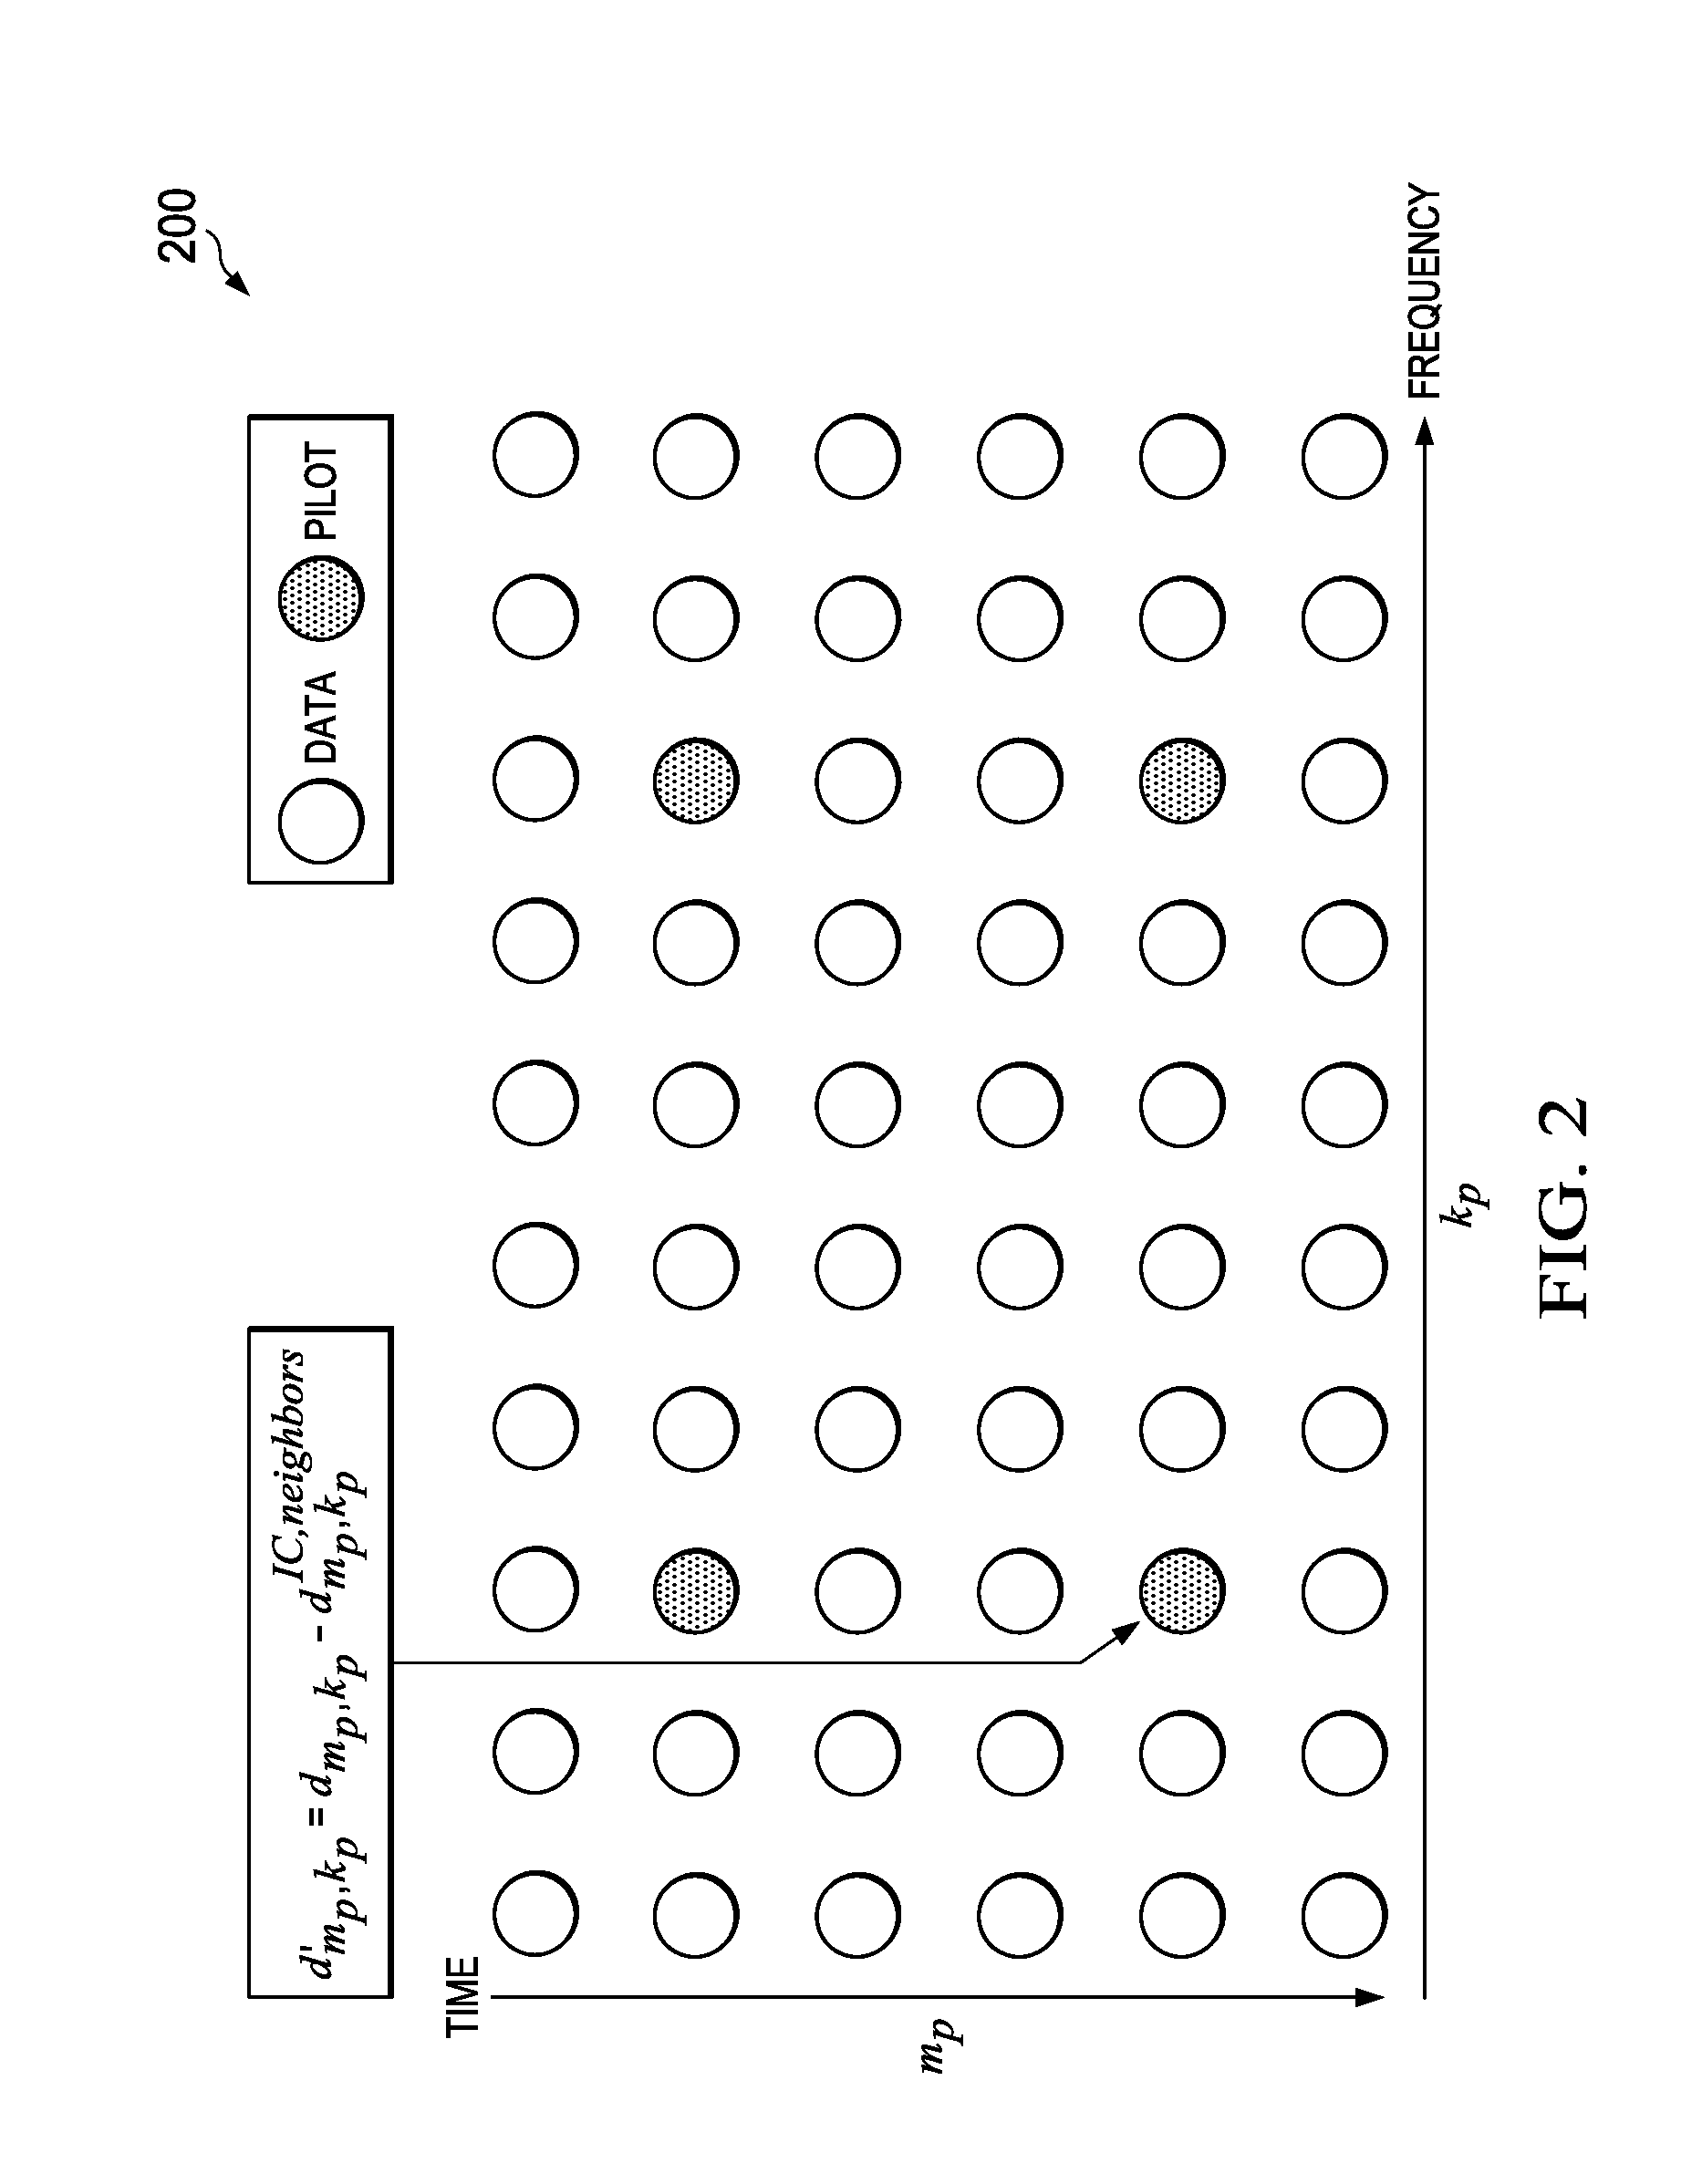 System and Method for Channel Estimation for Generalized Frequency Division Multiplexing (GFDM)